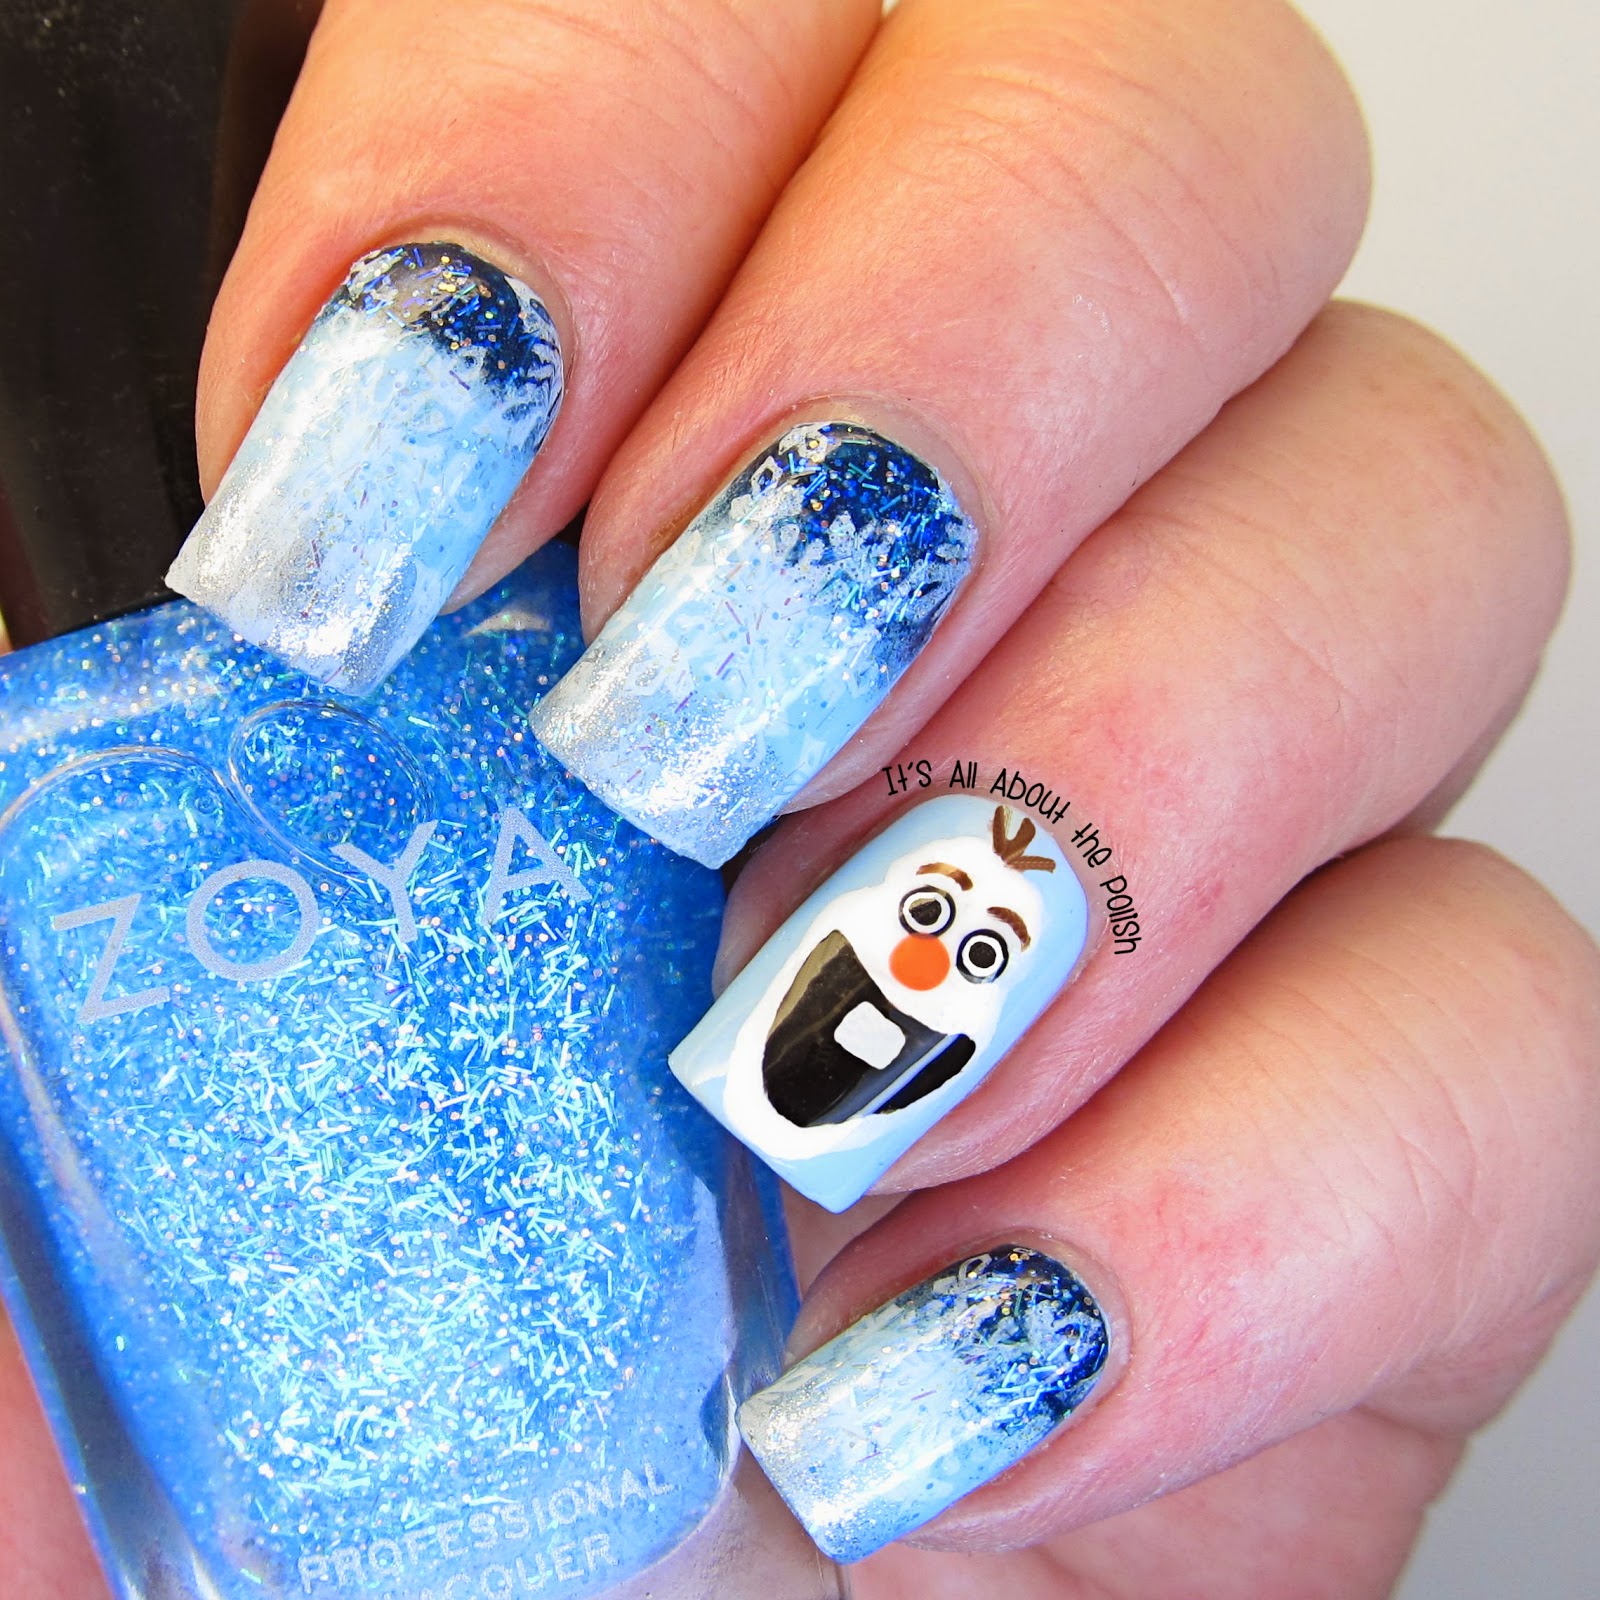 It's all about the polish: AN Monday theme - Disney - Olaf from Frozen ...